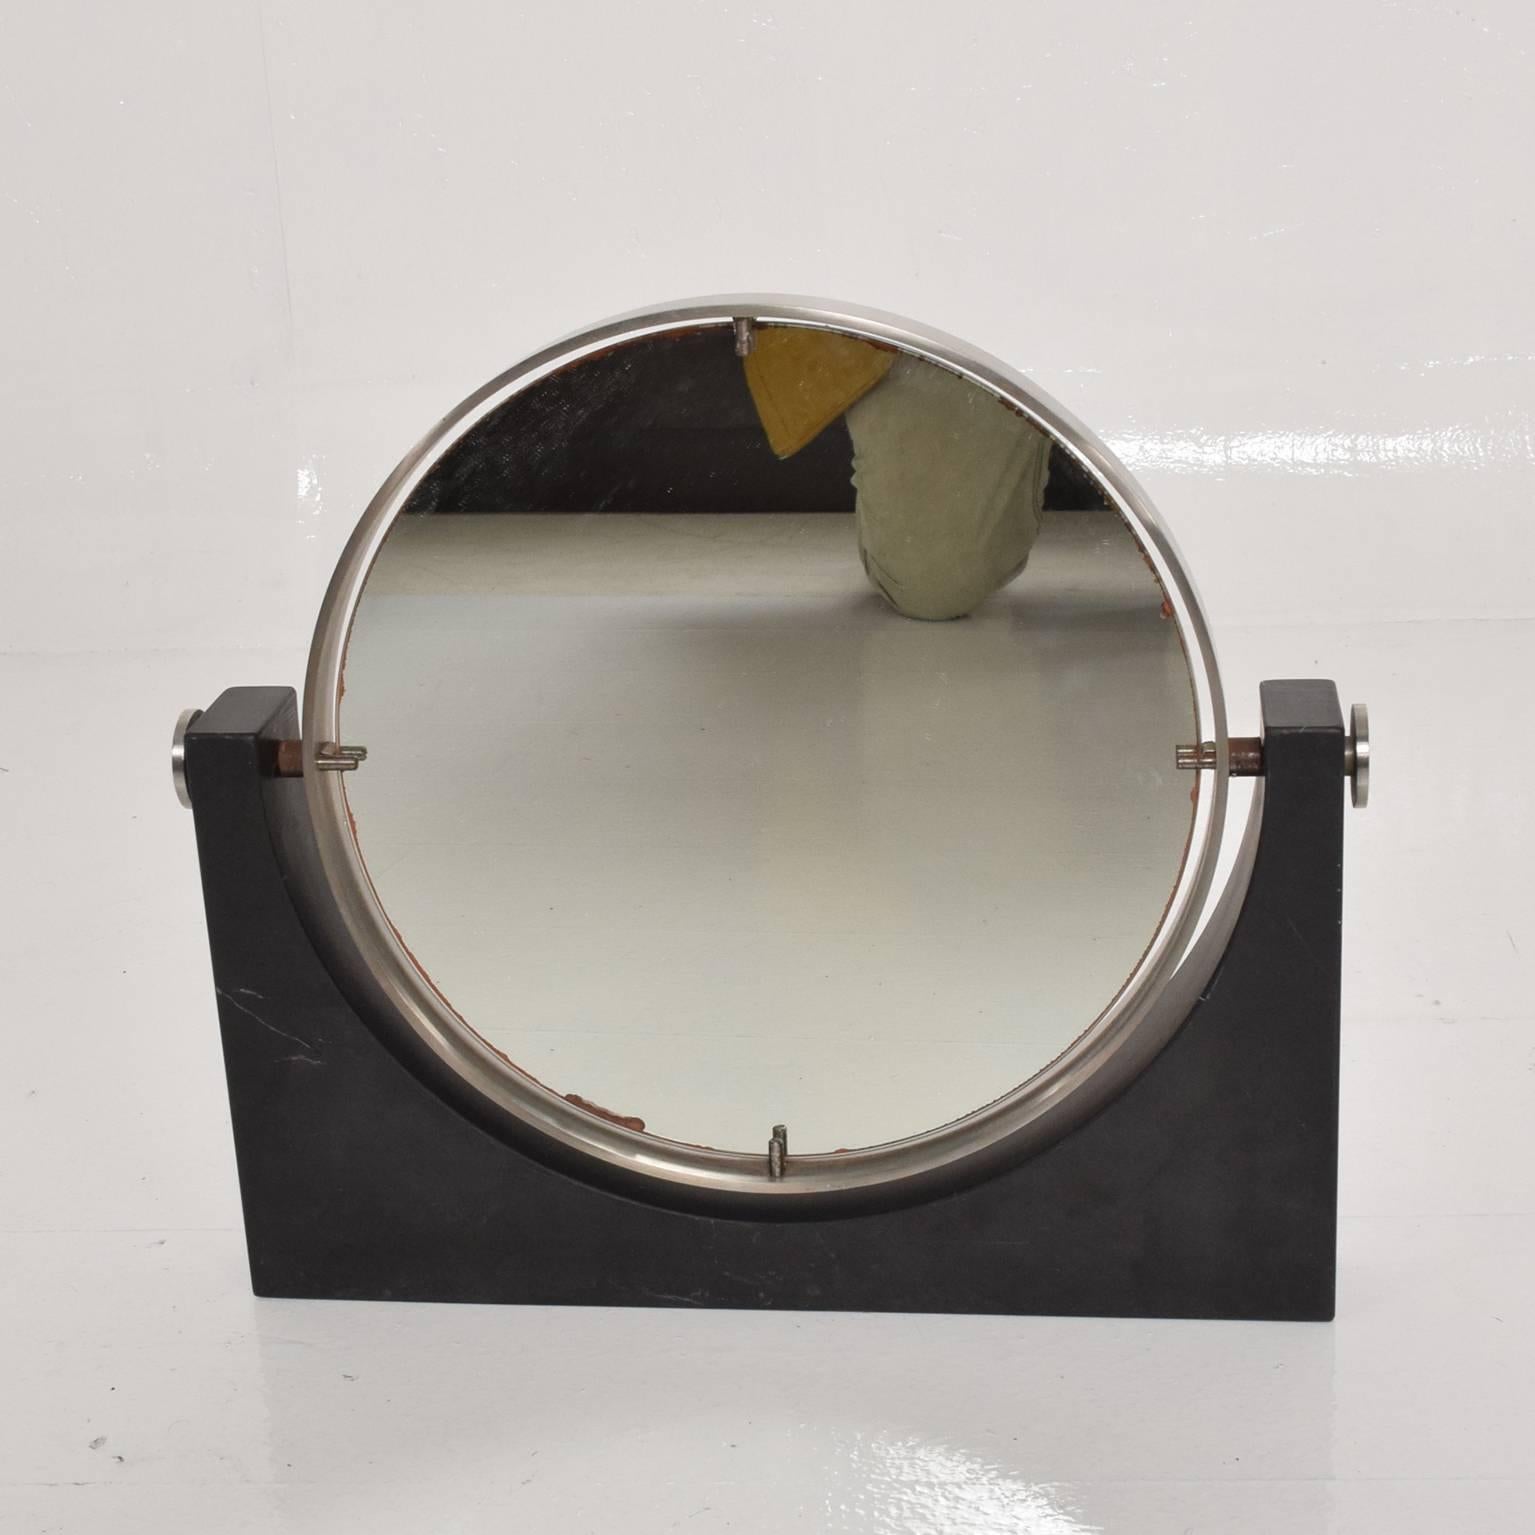 For your consideration a vintage modern table mirror in black marble and stainless steel.
Made in Italy, circa 1970s.
Dimensions: 16" H x 18" W x 2 1/4" D, Mirror 13 1/4" in diameter.